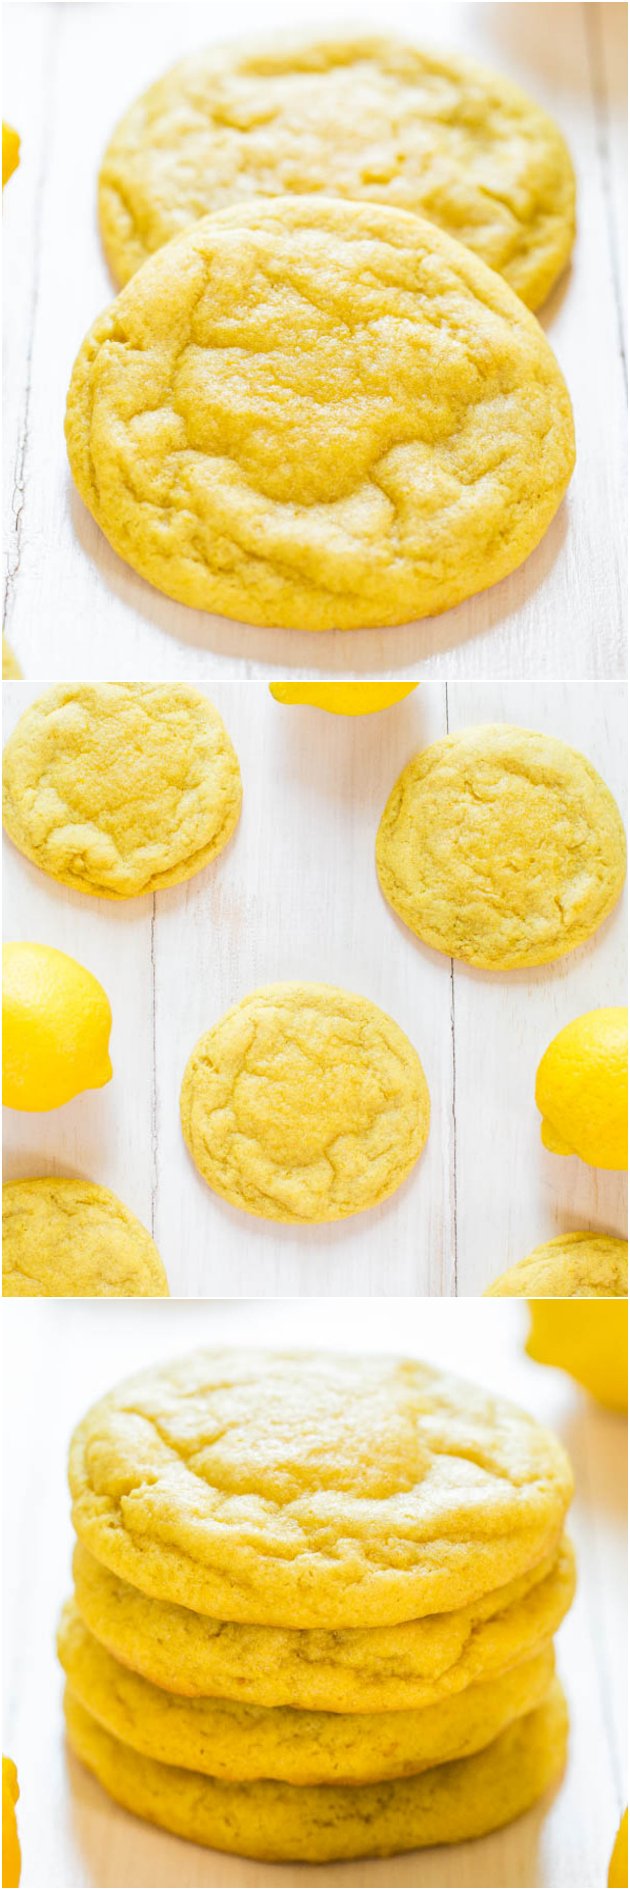 Soft and Chewy Lemon Cookies - Packed with big, bold lemon flavor for all you lemon lovers! They're soft, chewy and not at all cakey!!